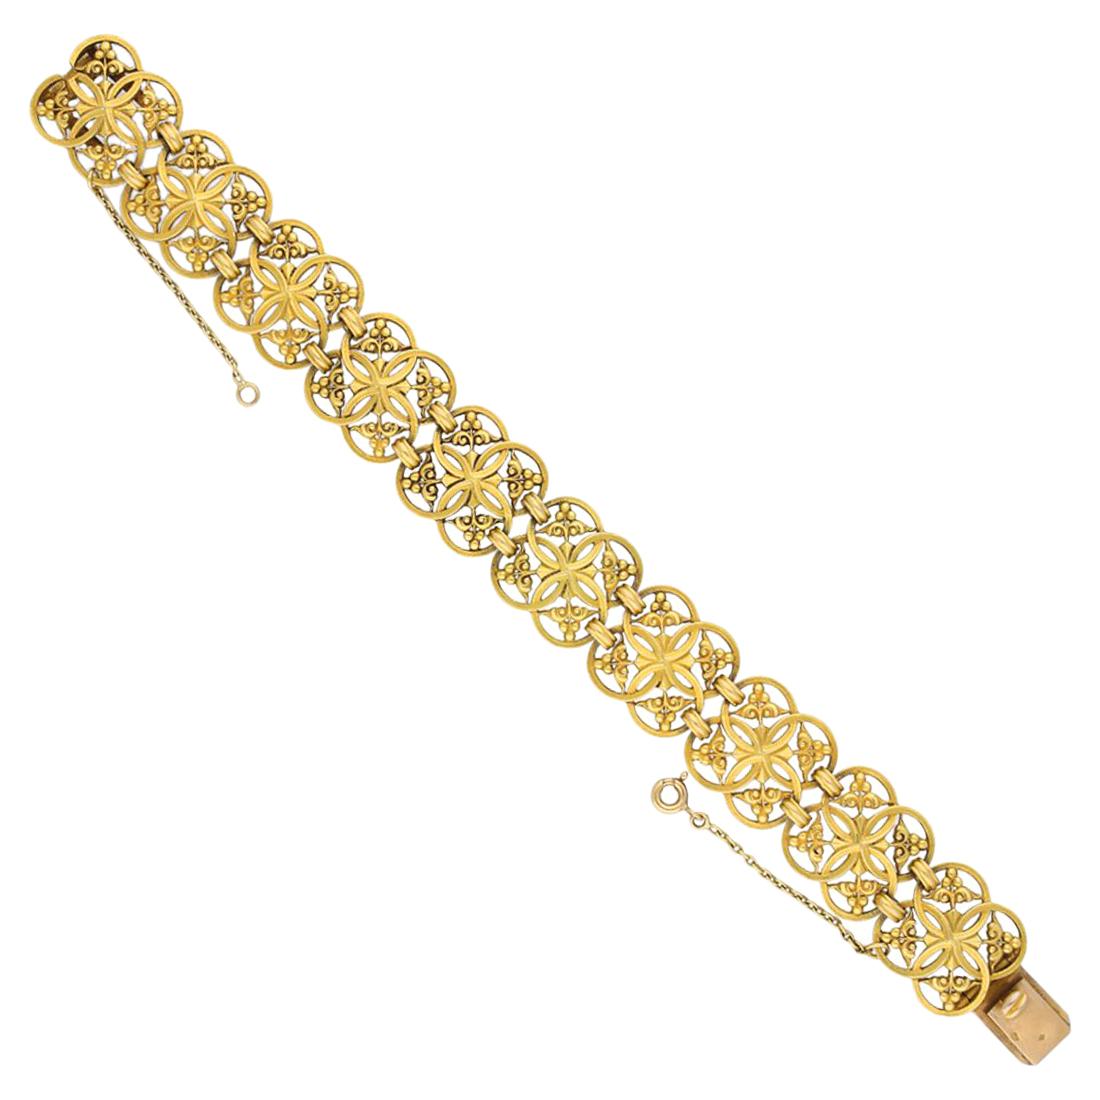 Gothic Revival Gold Bracelet by Wiese, circa 1885